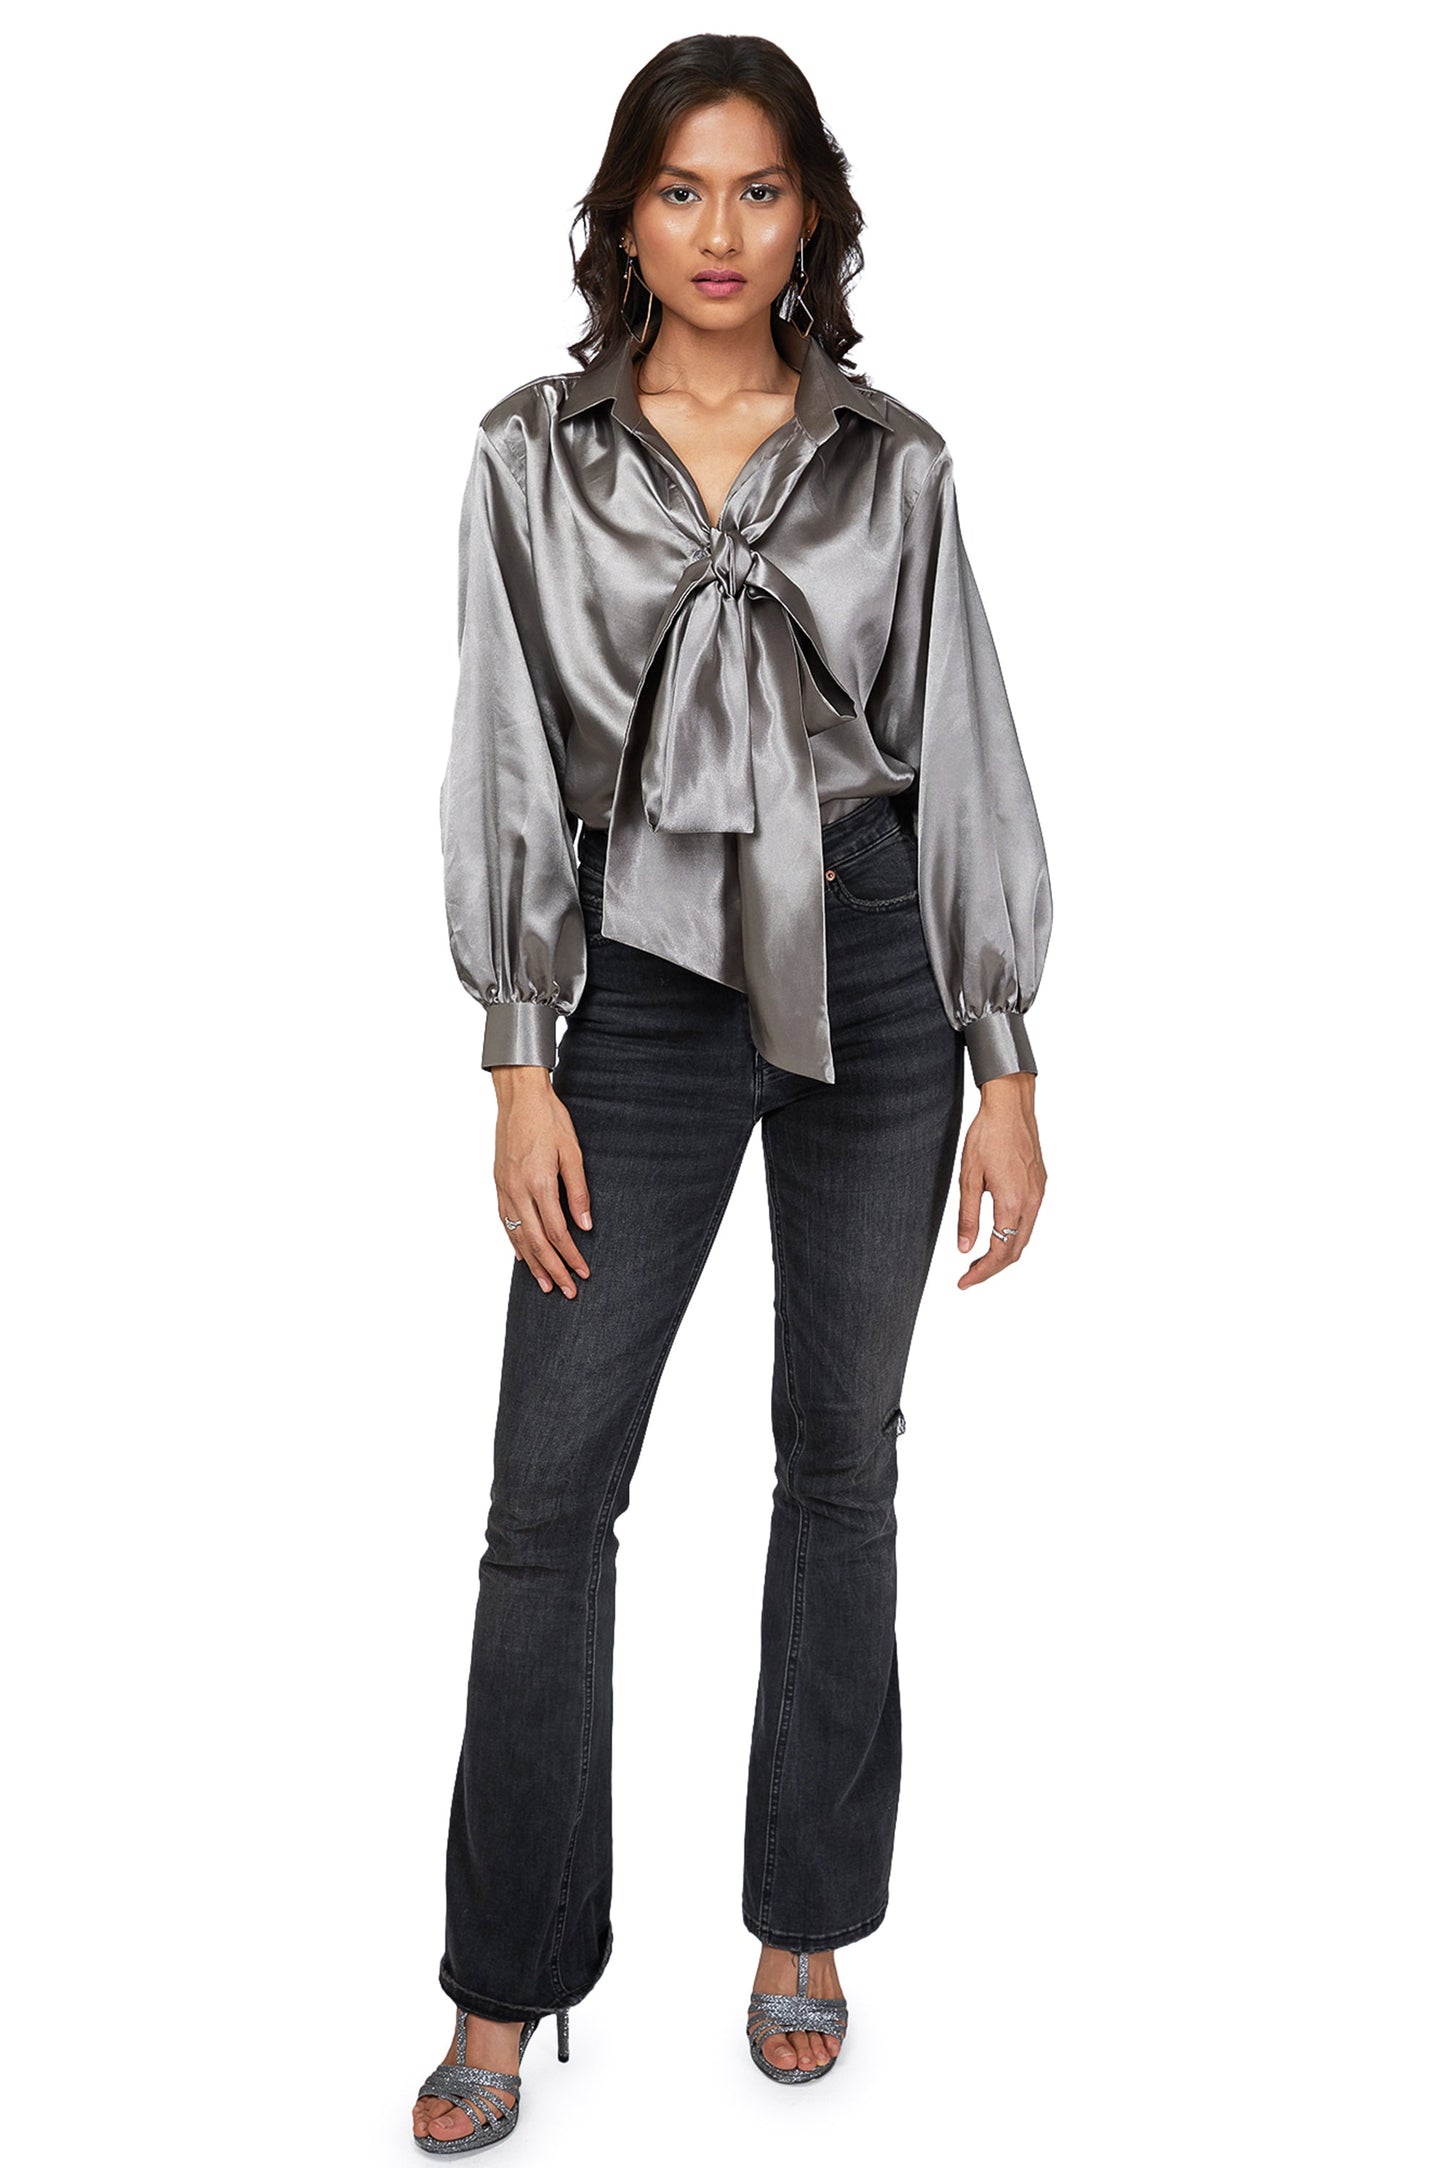 SILVER SATIN TOP WITH NECK TIE UP